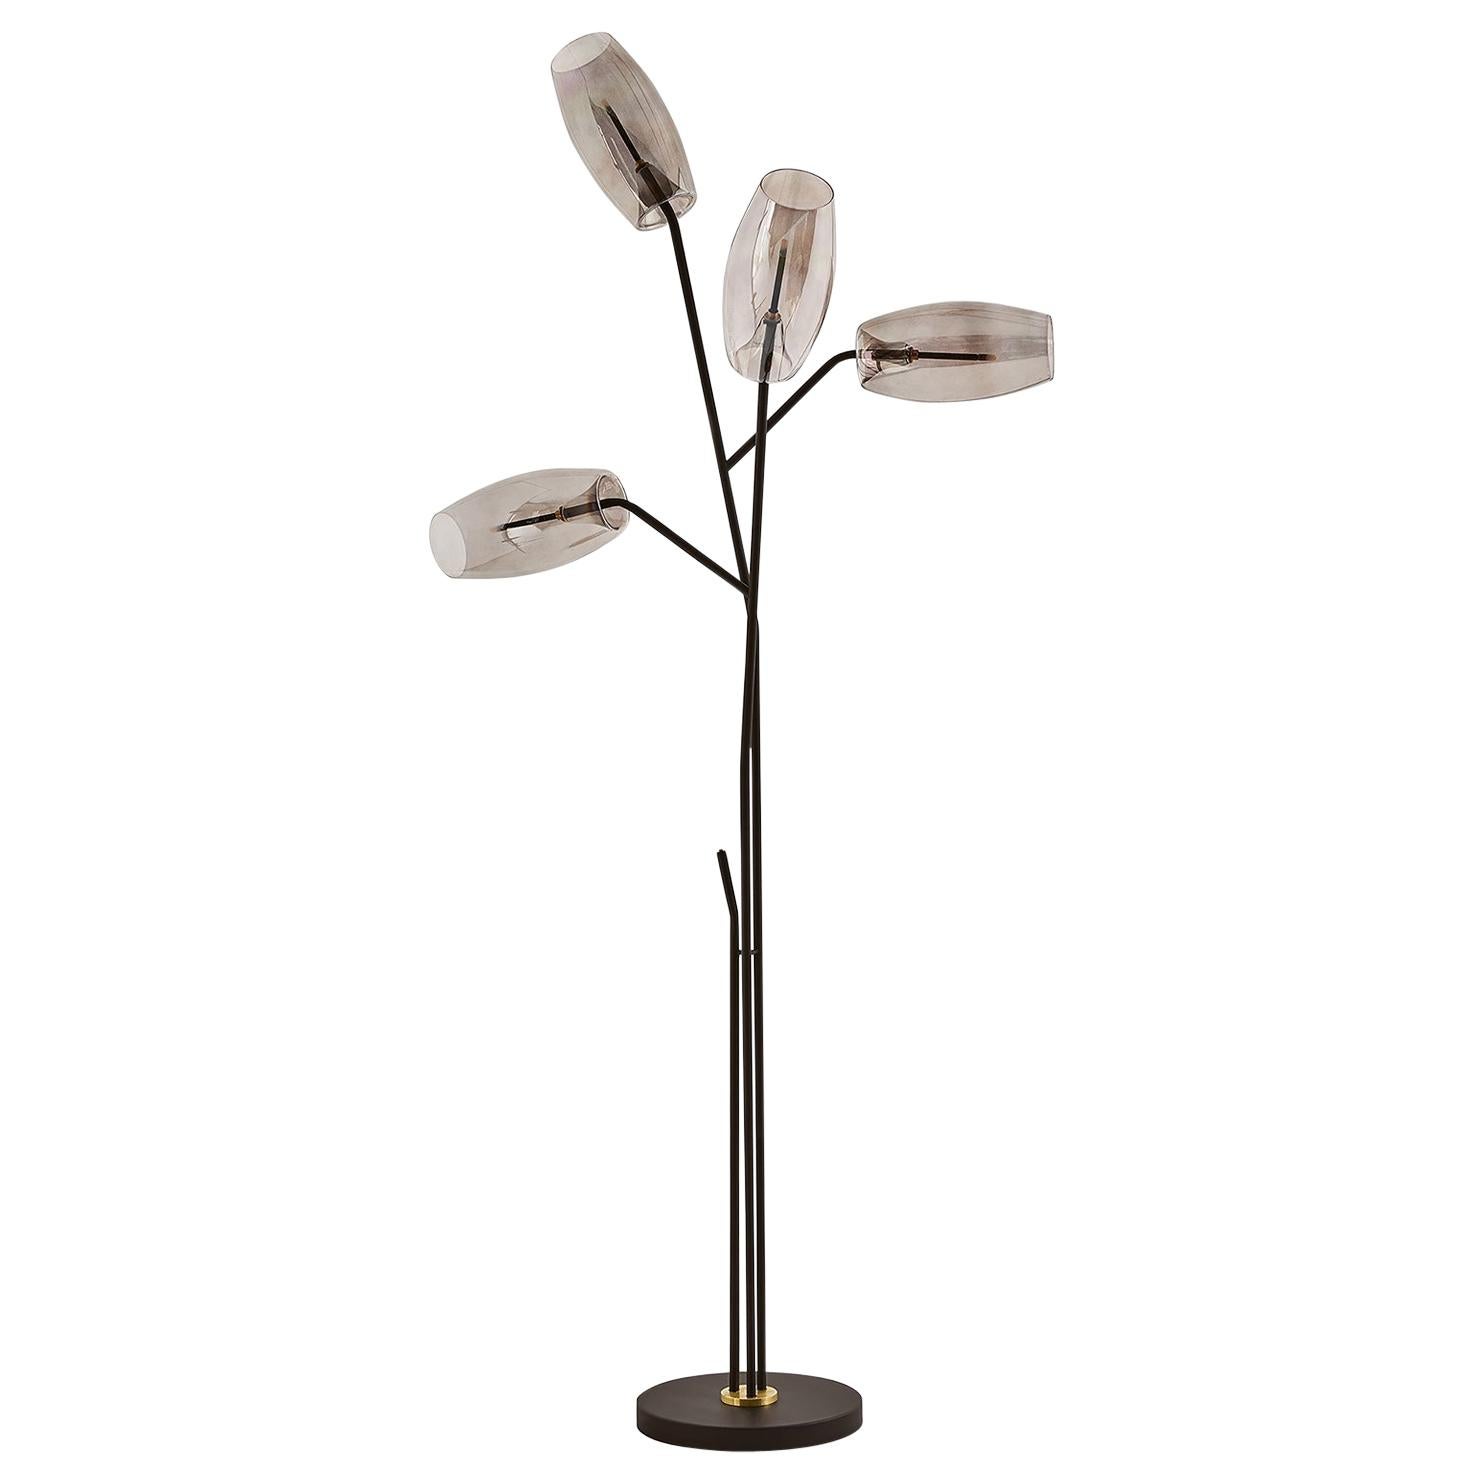 Diantha Terra by Gallotti & Radice with Mouth Blown Glass and Bronzed Metal For Sale